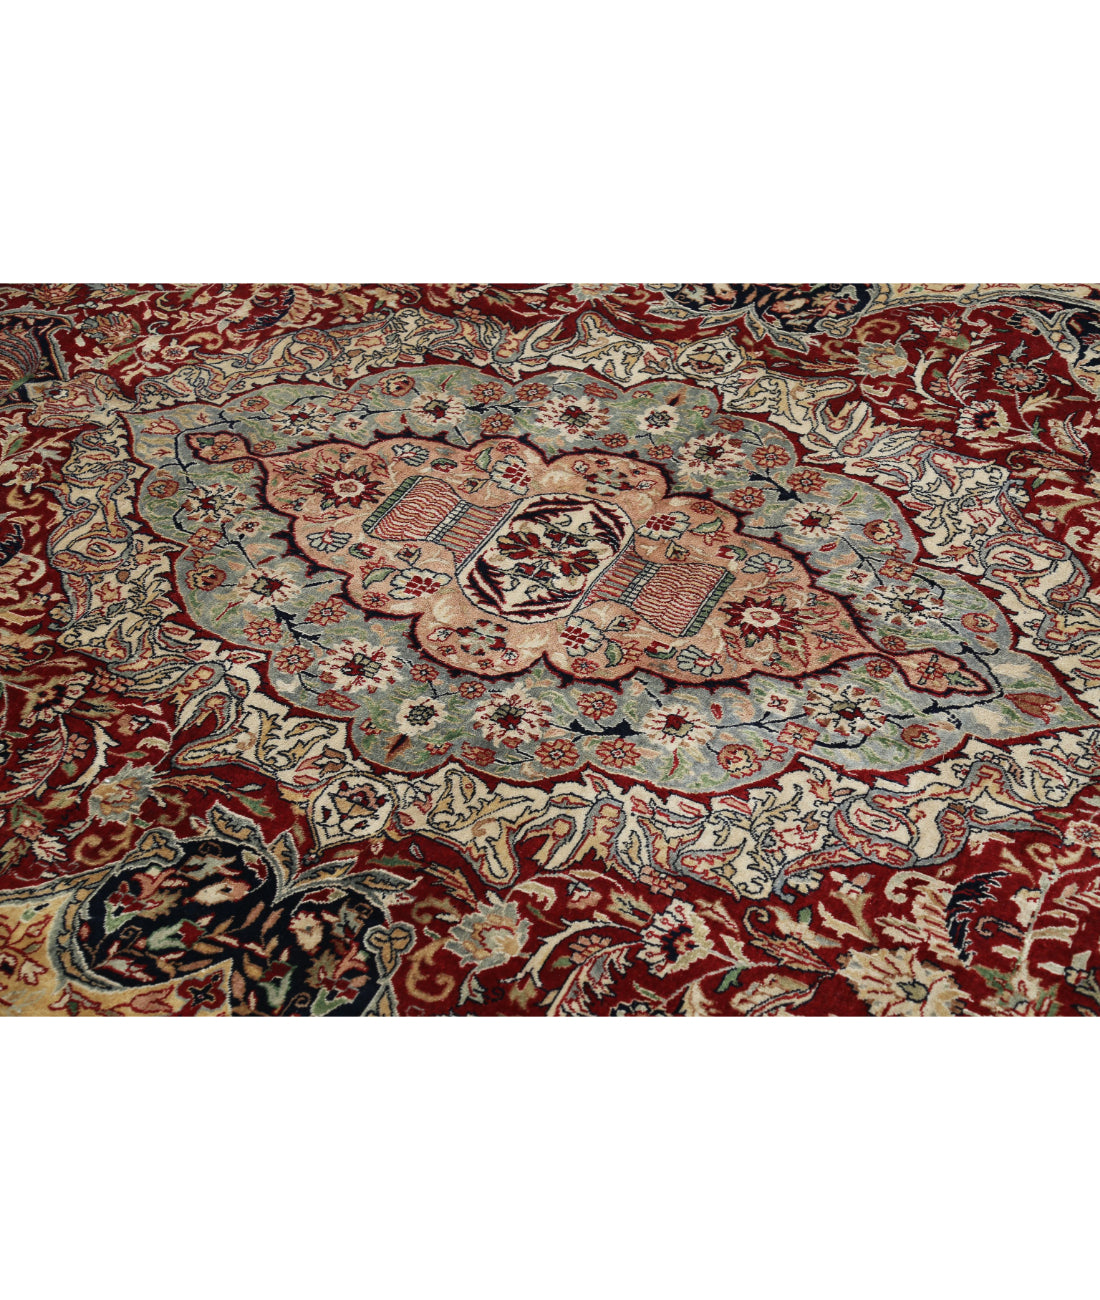 Hand Knotted Persian Kashmar Wool Rug - 7'9'' x 11'7'' 7'9'' x 11'7'' (233 X 348) / Red / Blue